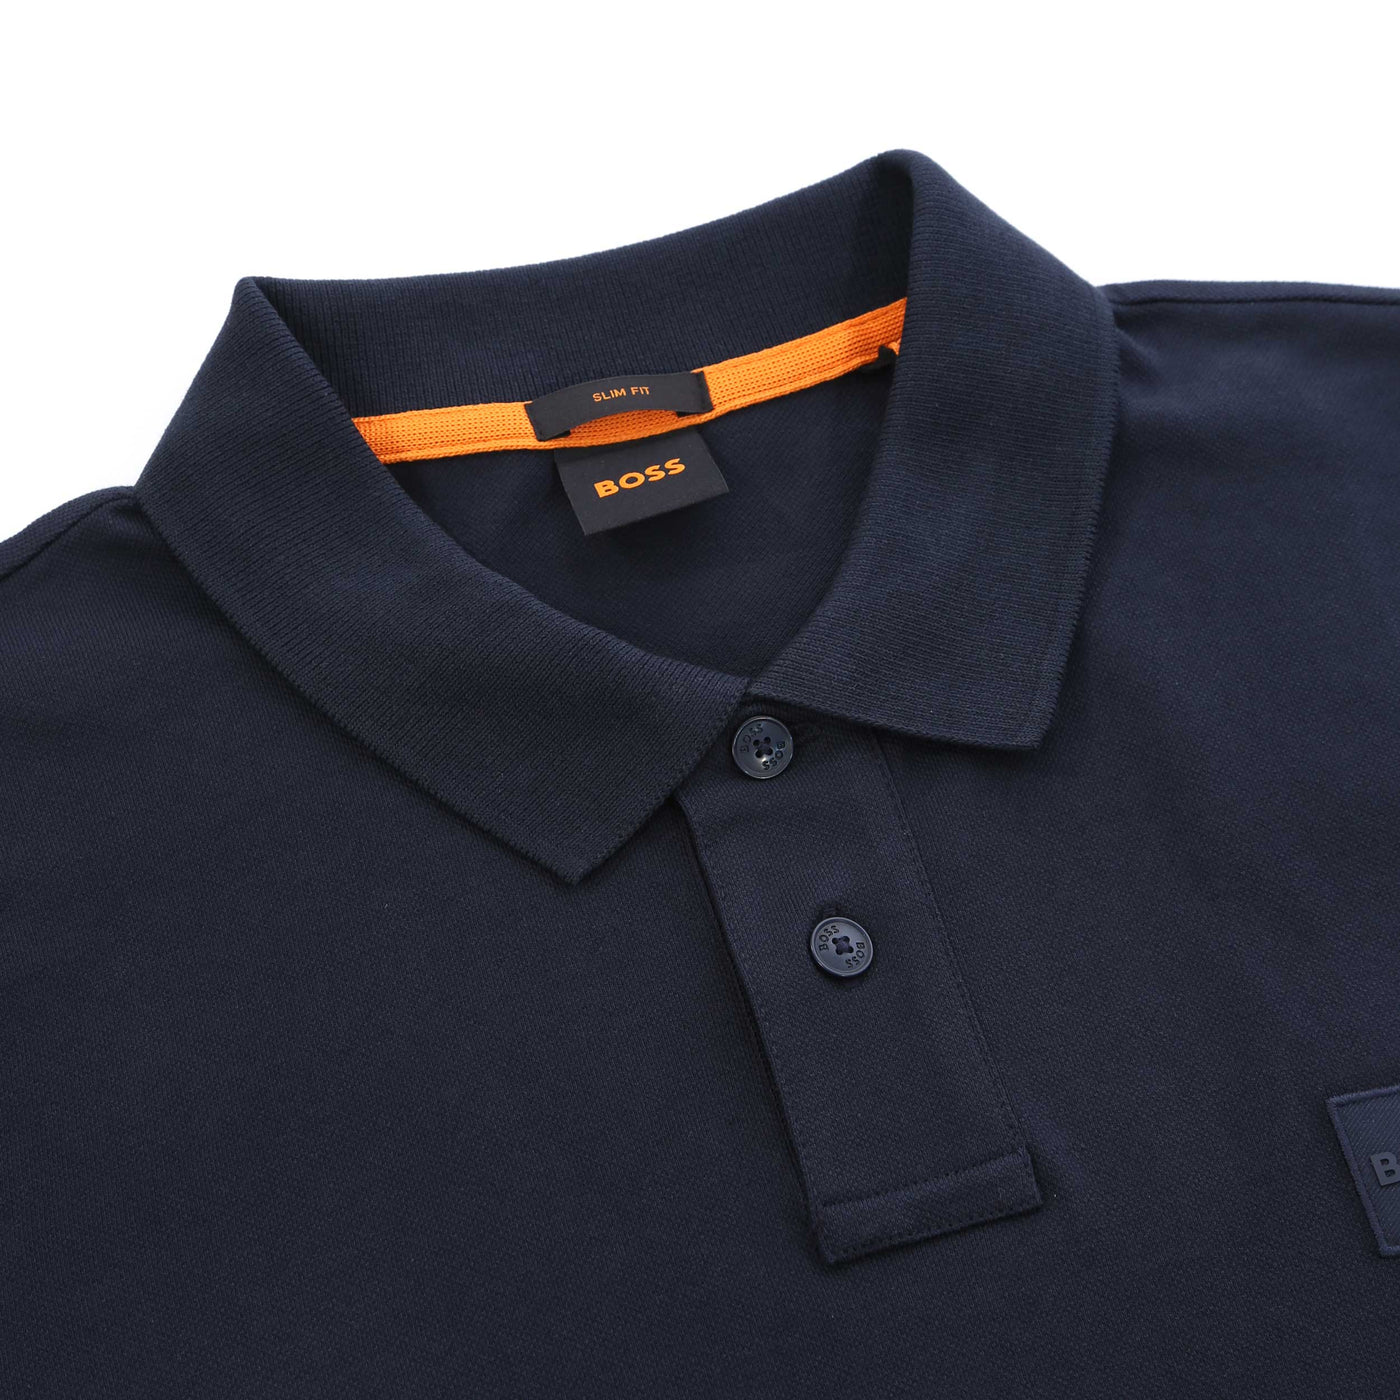 BOSS Passerby Long Sleeve Polo Shirt in Navy Collar